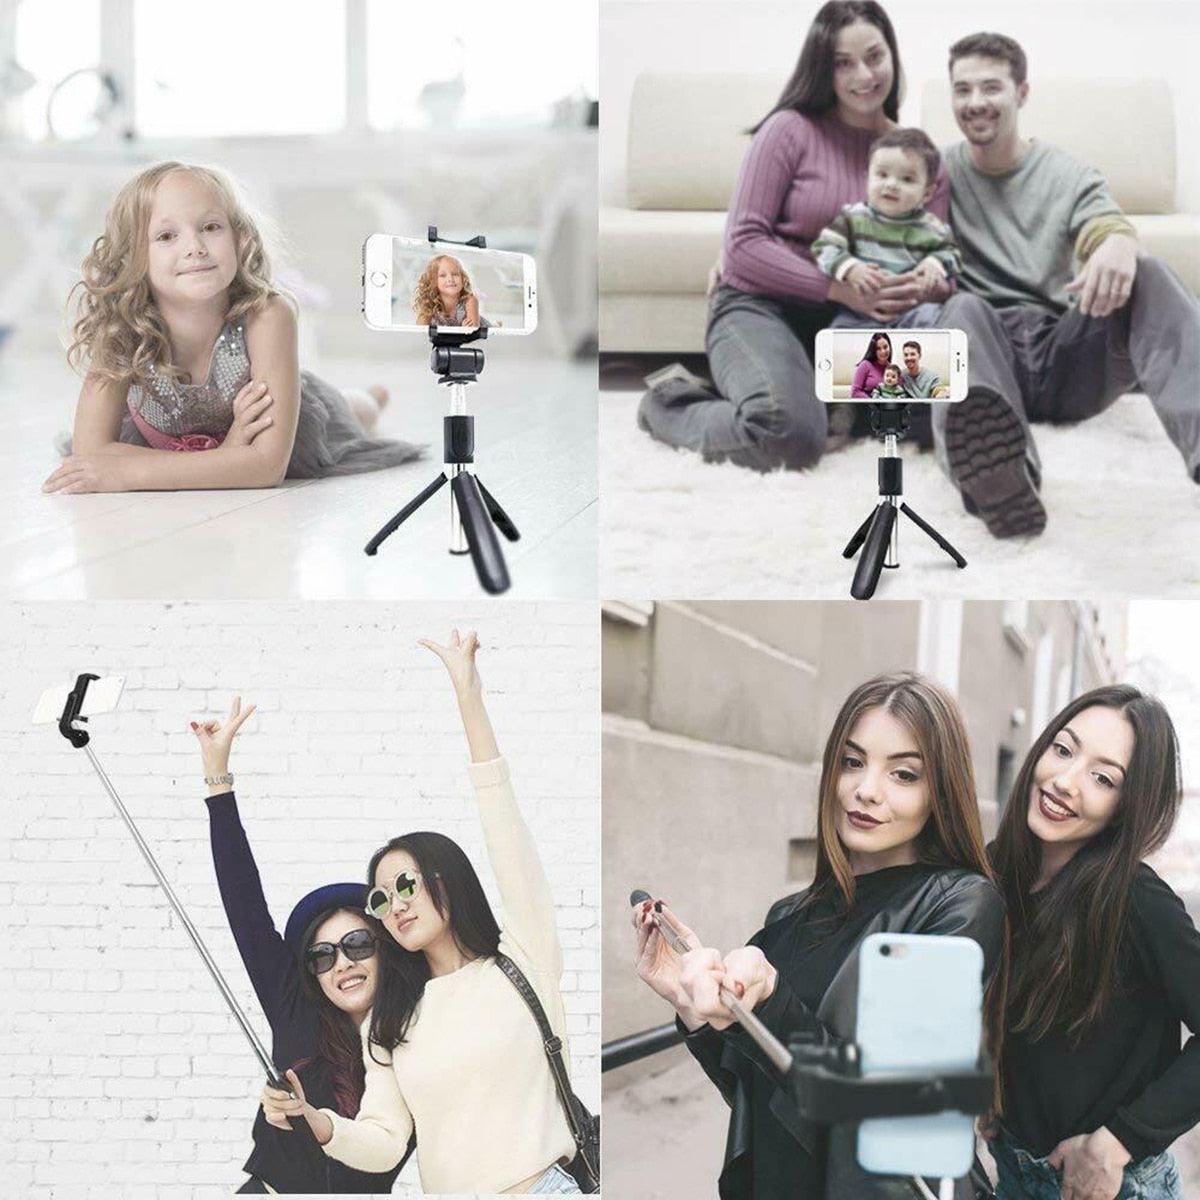 3 In 1 Portable BT Selfie Stick Remote Control Foldable Mini Tripod Extendable Monopod For Phone Photo Shooting Live Holder (RS)(1U50)